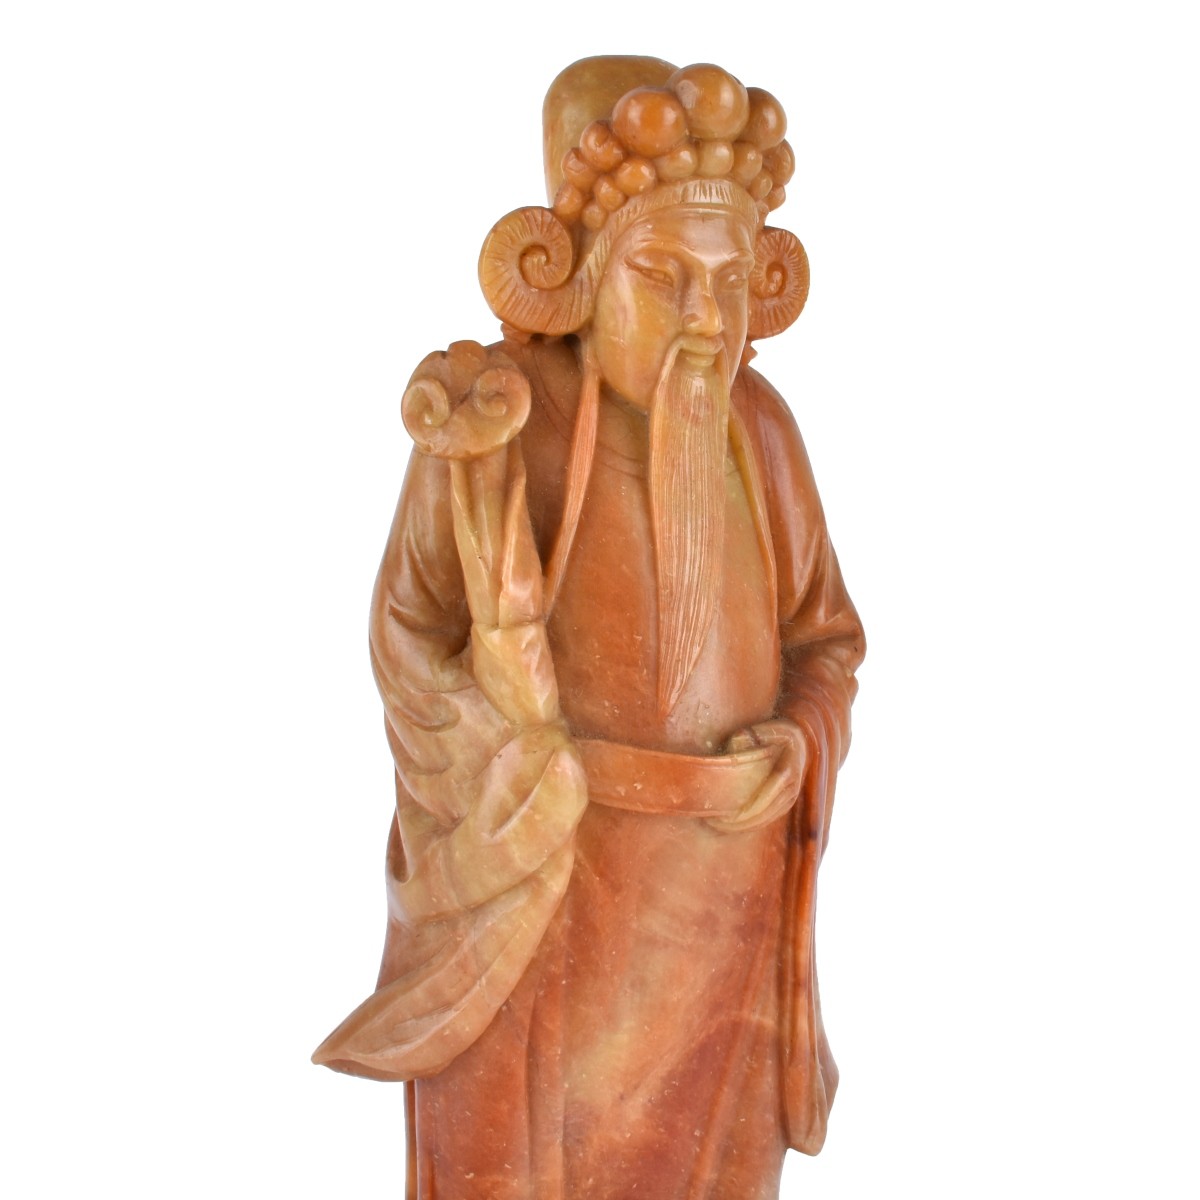 Three Early 20th C Chinese Soapstone Figures